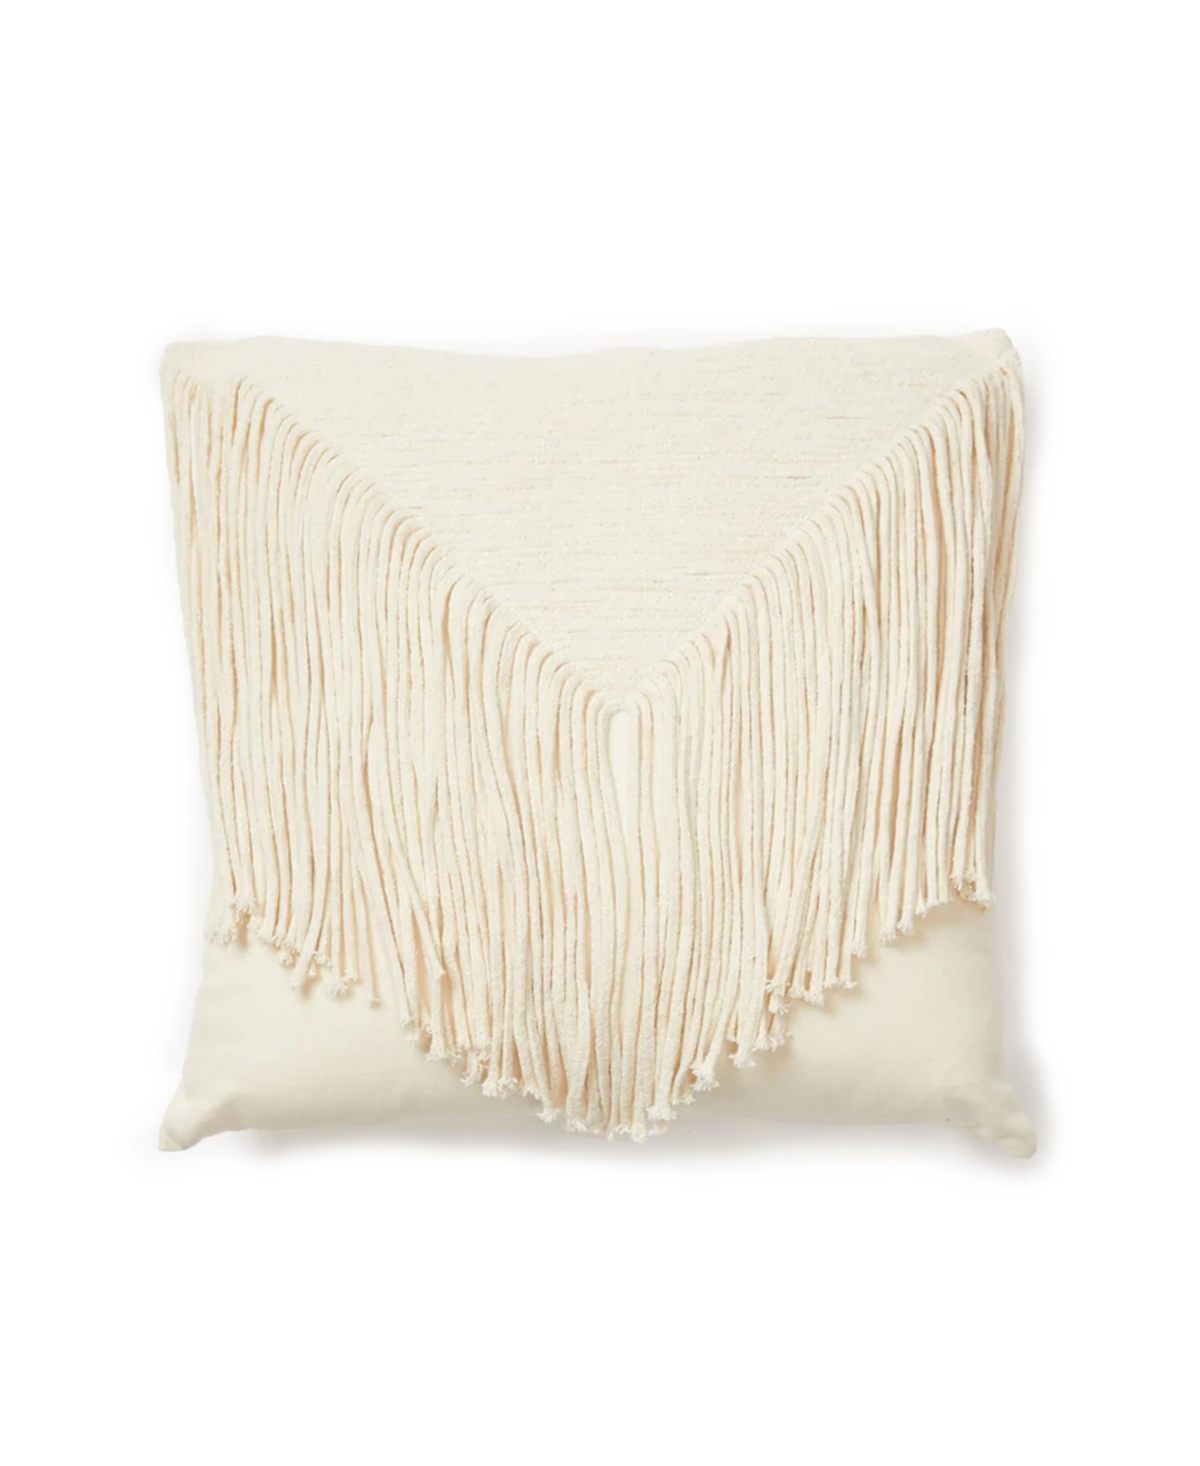 DORMIFY DESERT FRINGE SQUARE PILLOW, 20" X 20", ULTRA-CUTE STYLES TO PERSONALIZE YOUR ROOM